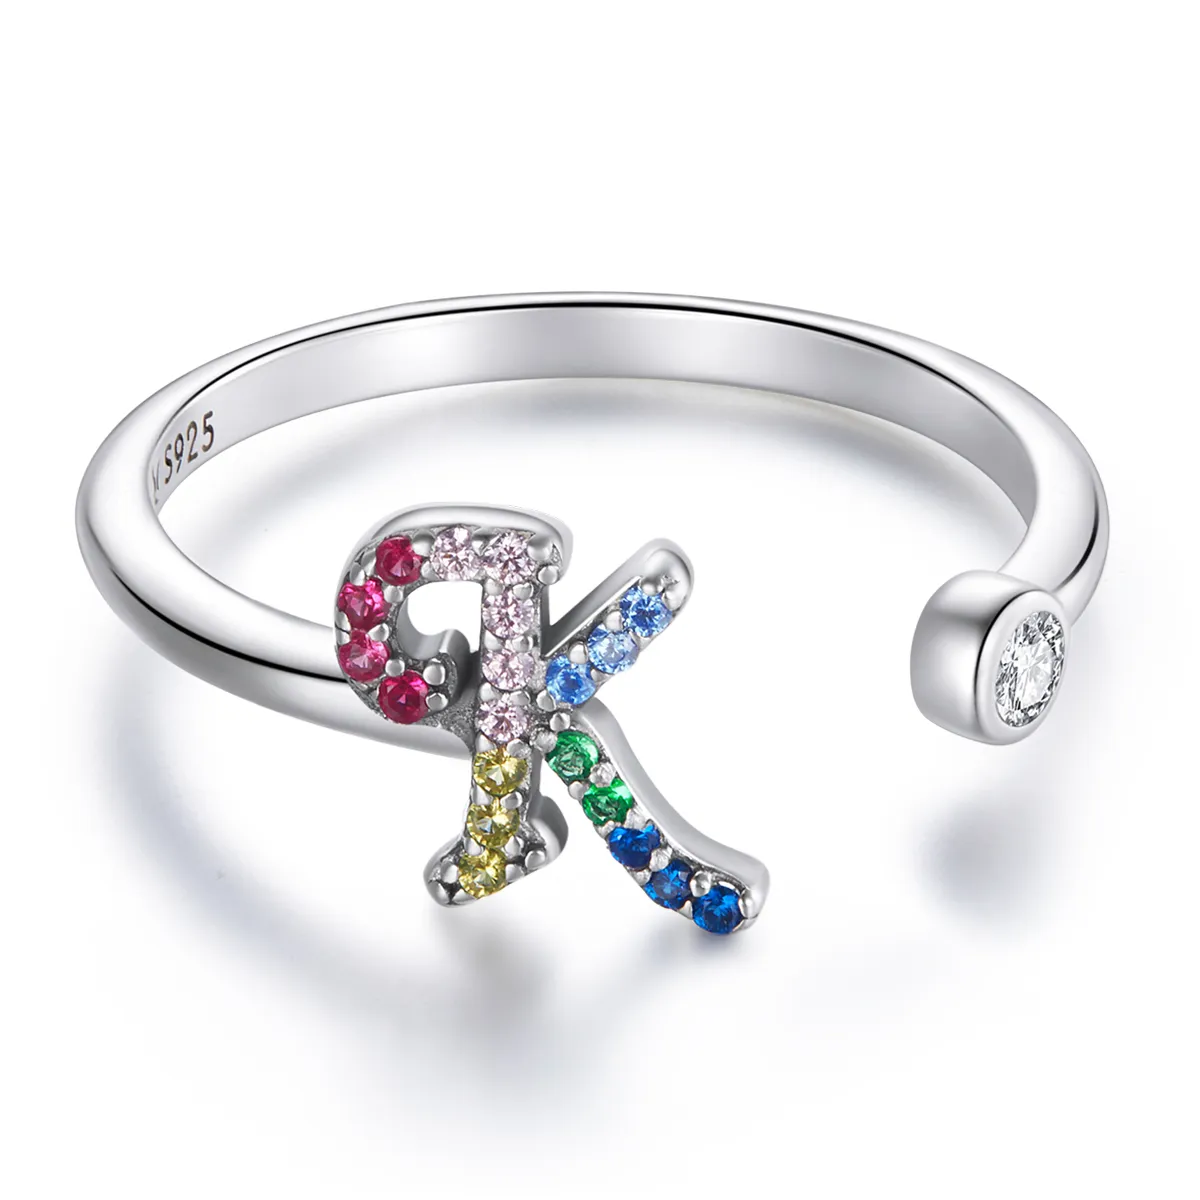 Pandora Style Colorful Letter-K Open Ring - SCR723-K